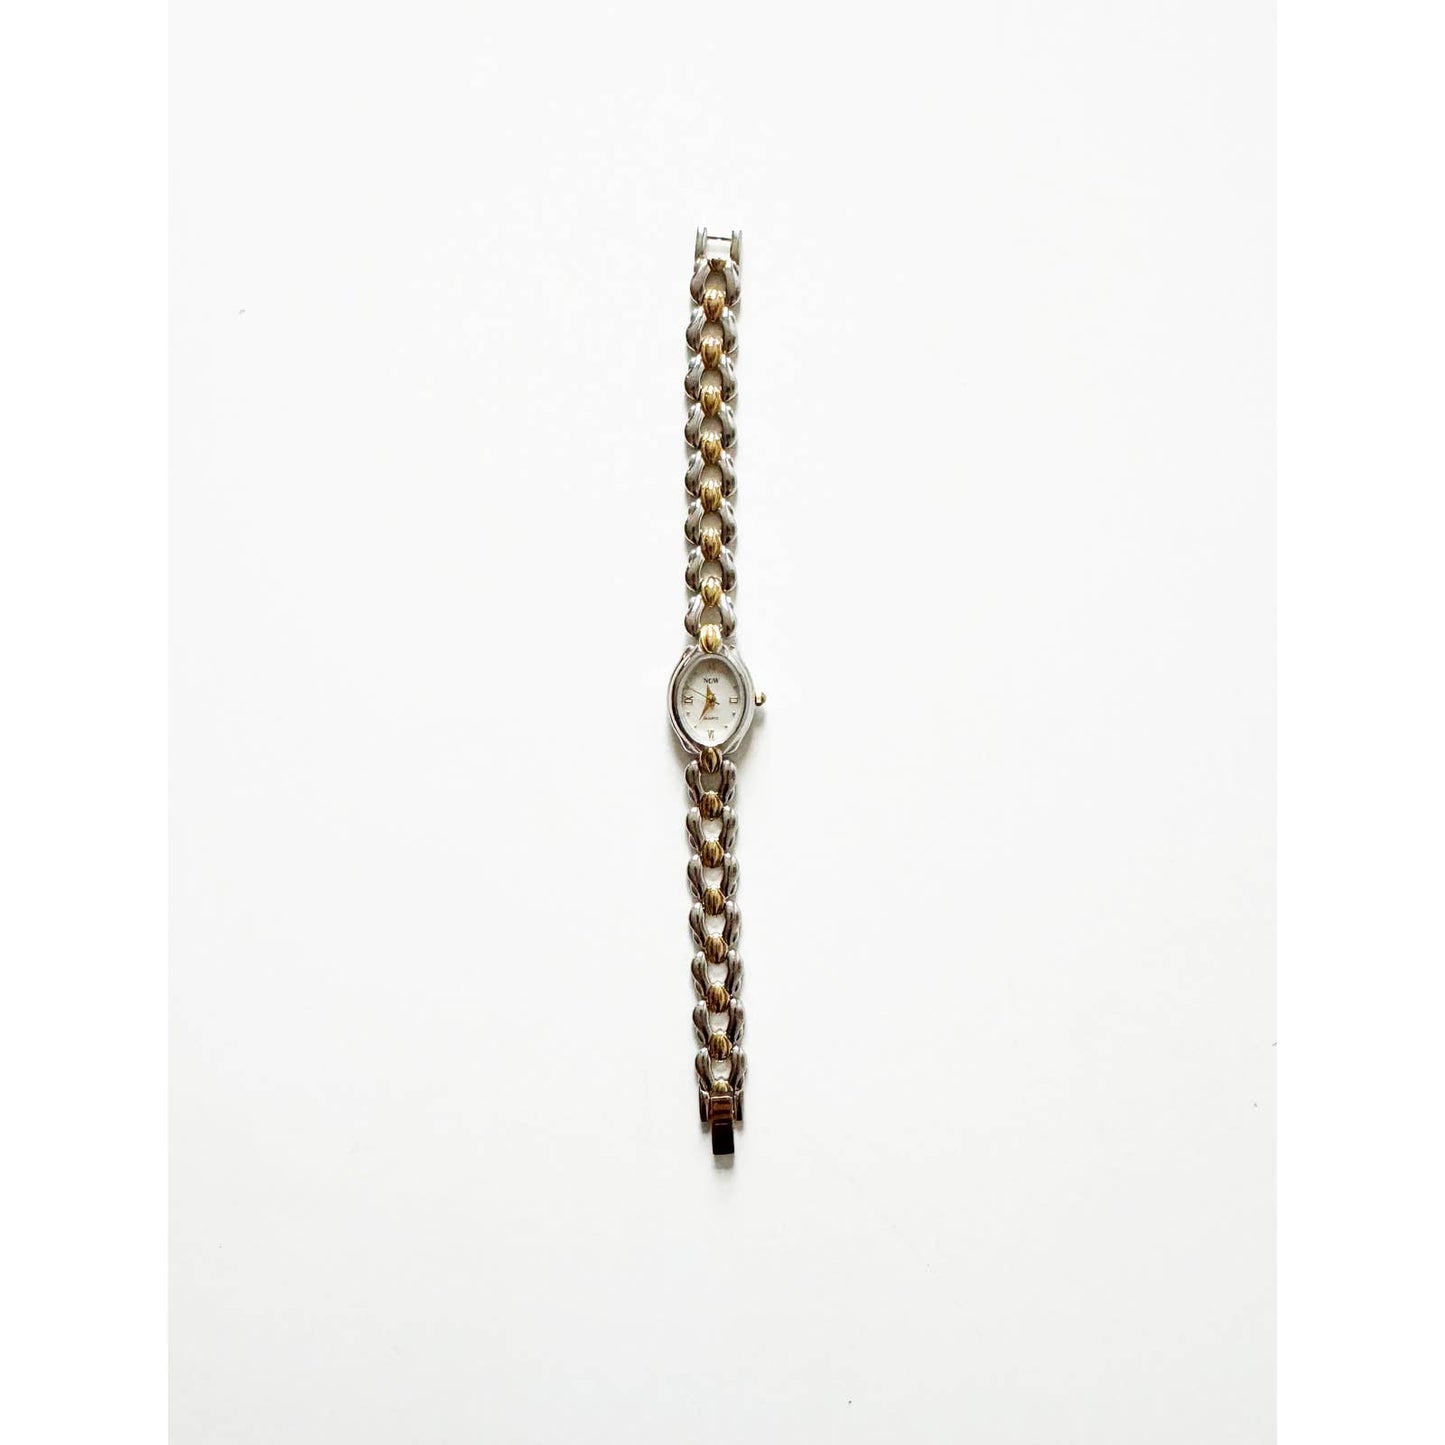 Vintage Small Two Tone Watch with Oval Face | Now